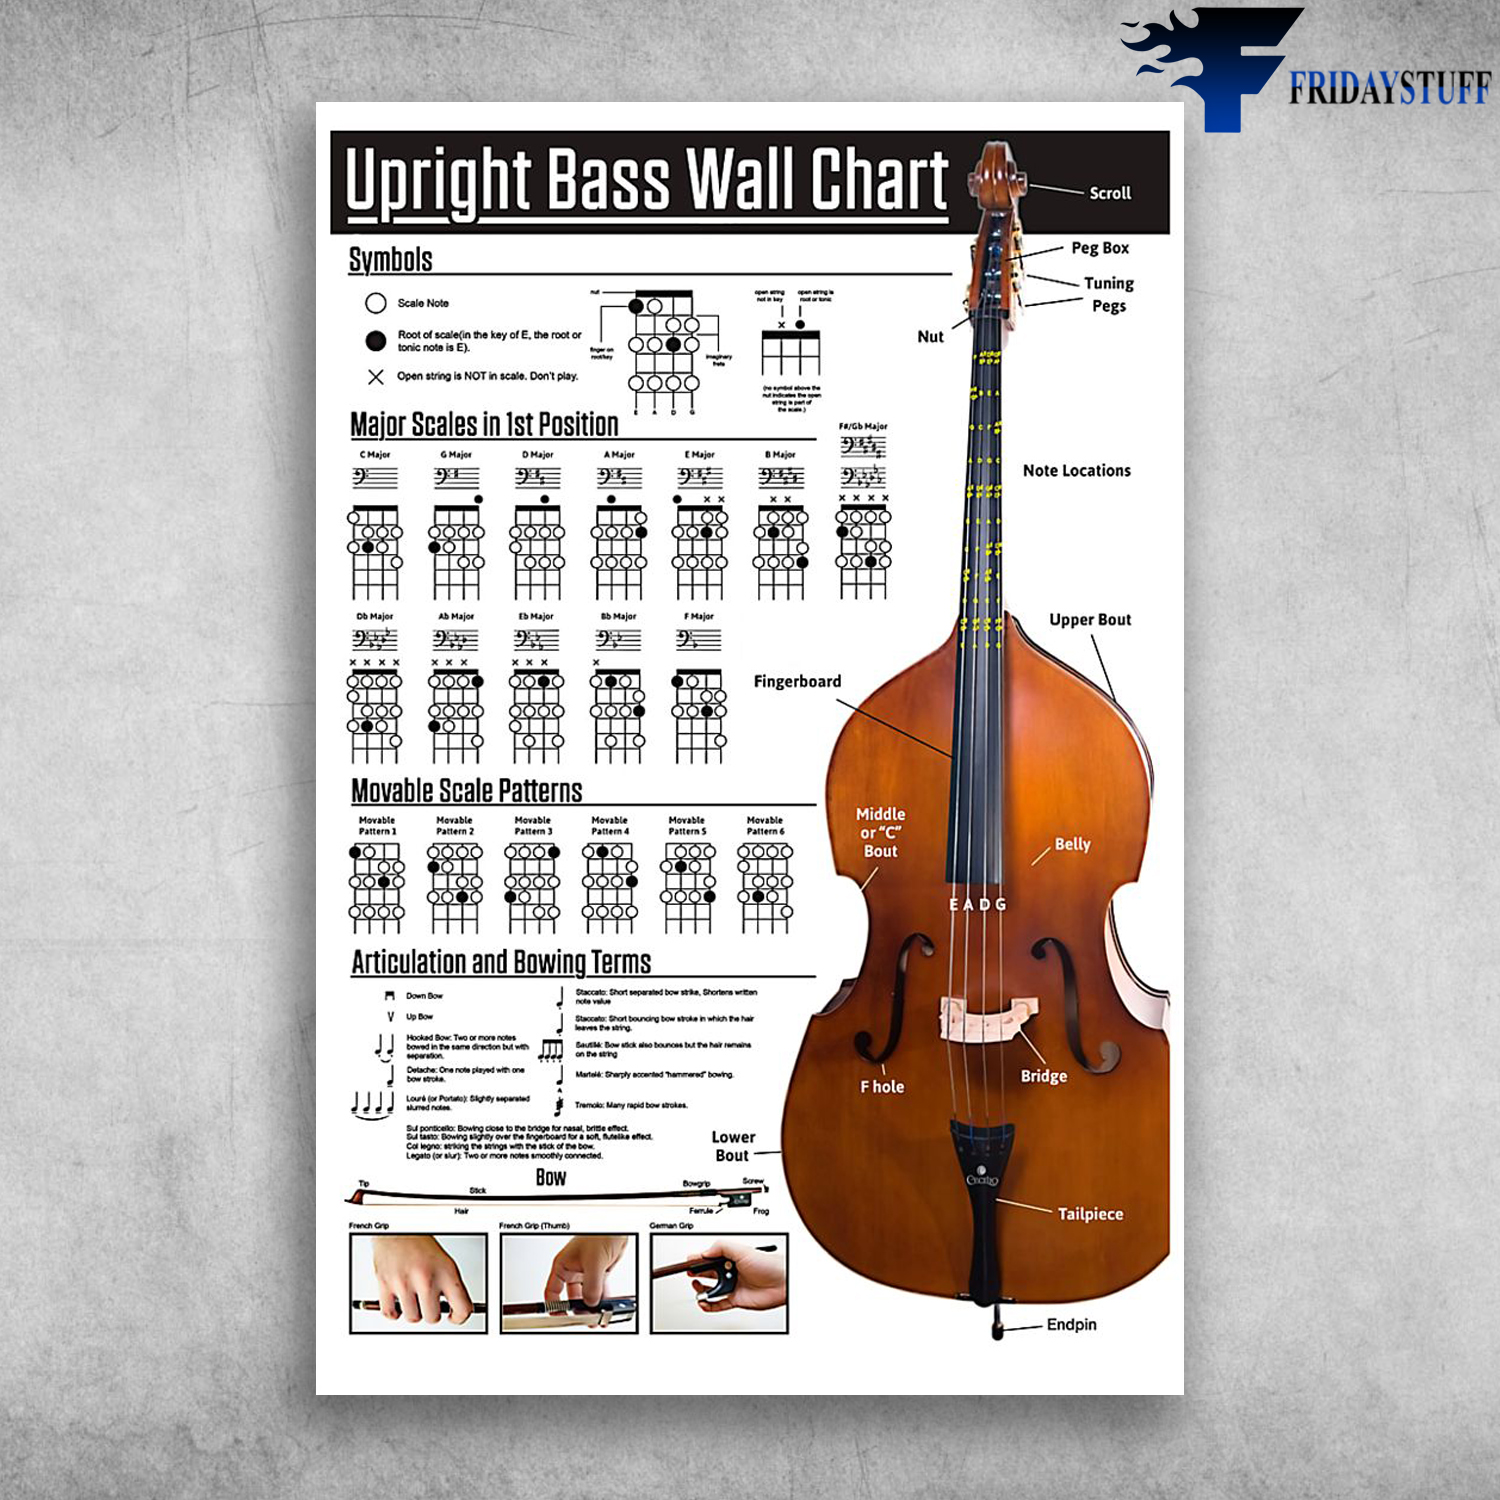 upright-bass-wall-chart-major-scales-in-1st-position-fridaystuff